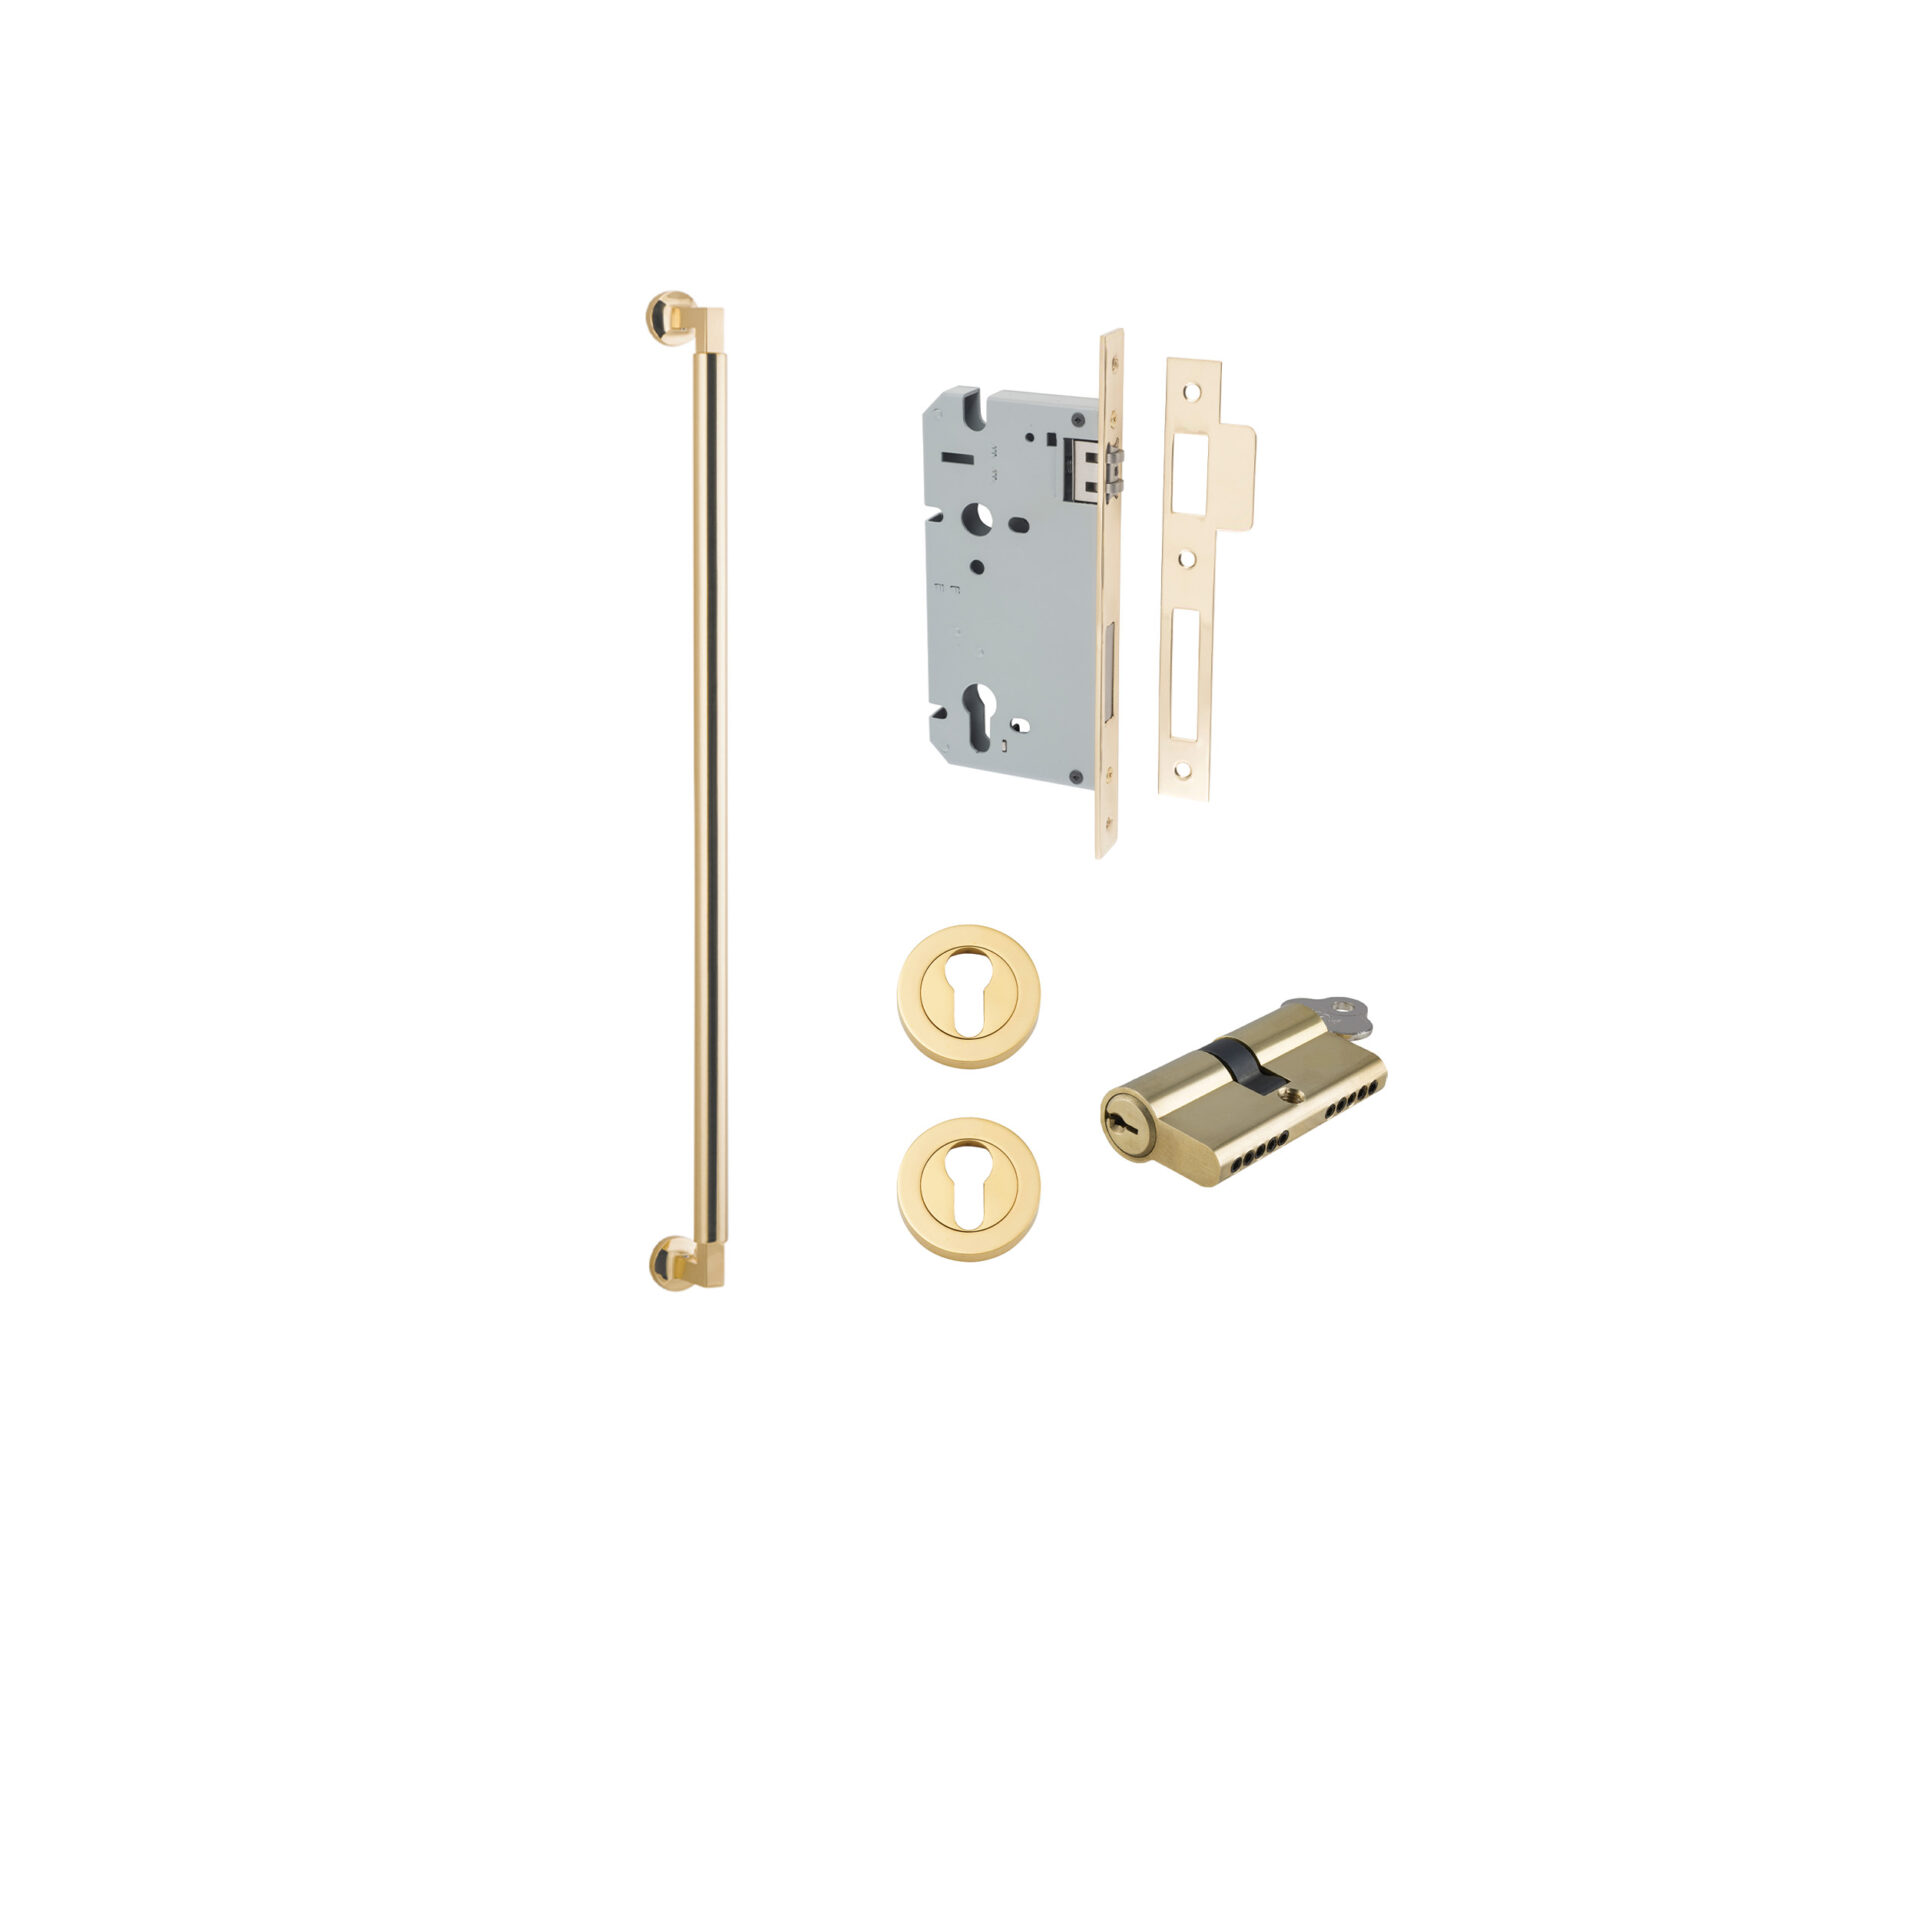 0480KENTR60KK - Berlin Pull Handle - 600mm Entrance Kit with Separate High Security Lock - Polished Brass - Entrance